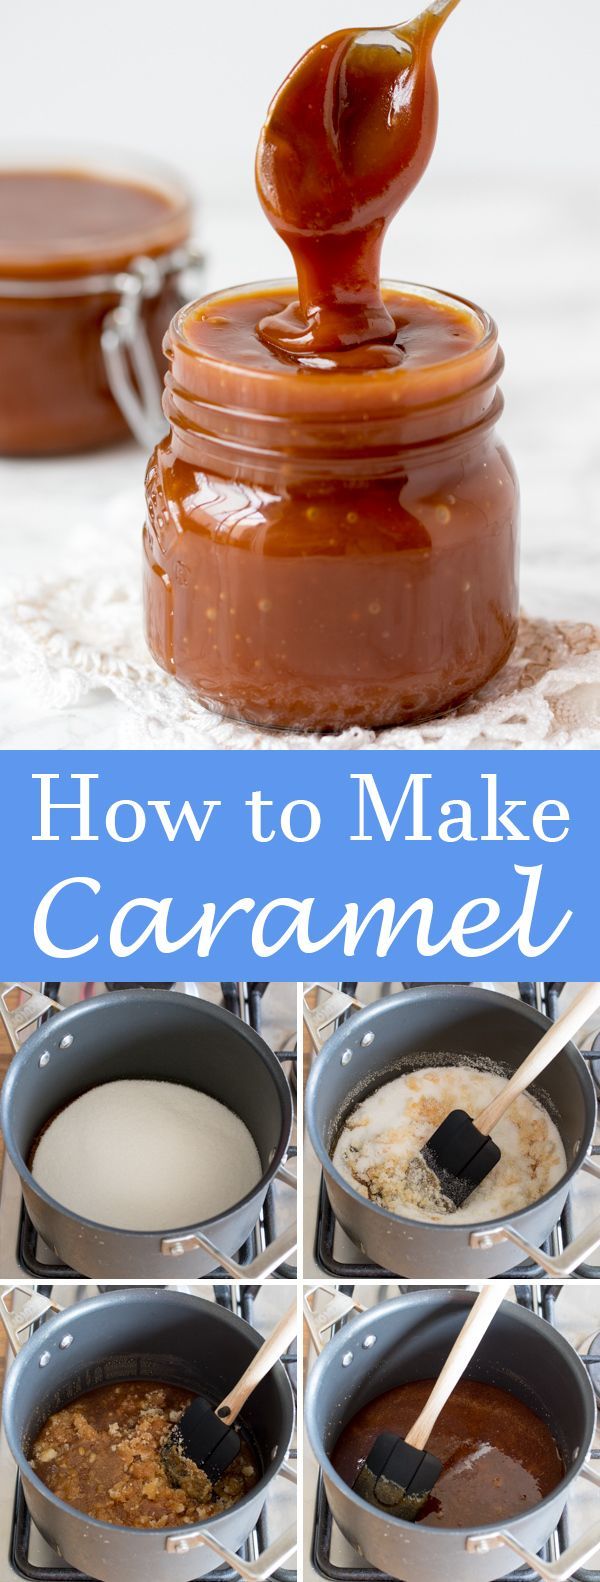 How to make caramel. Perfect for drizzling on cakes and ice cream!